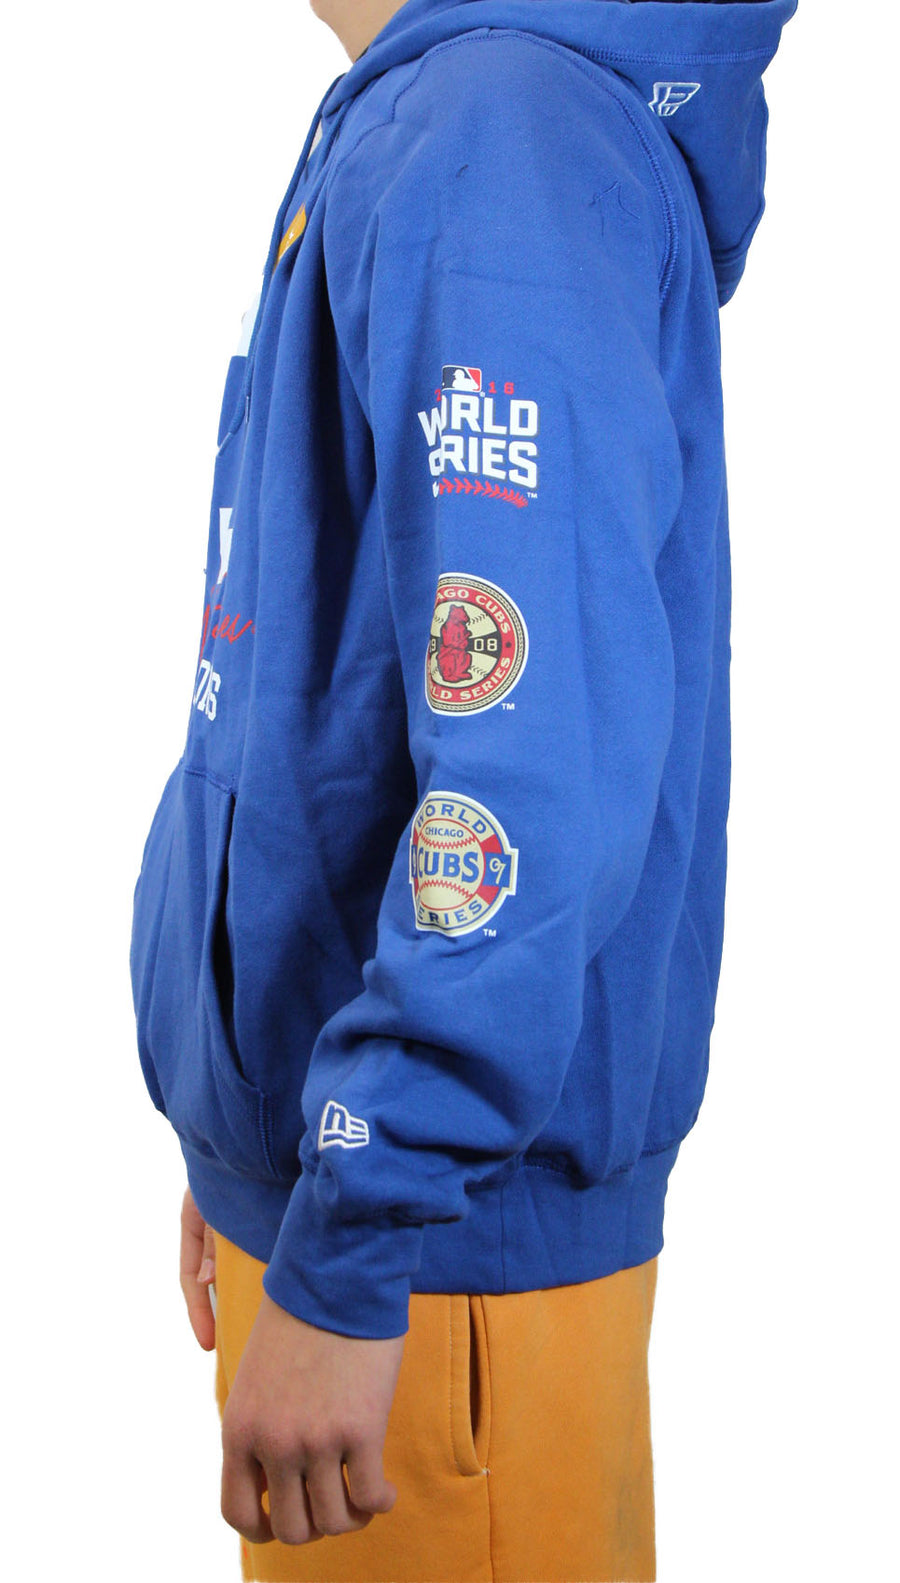 New Era Chicago Cubs "World Series Champs" Hoodie - Blue/Red